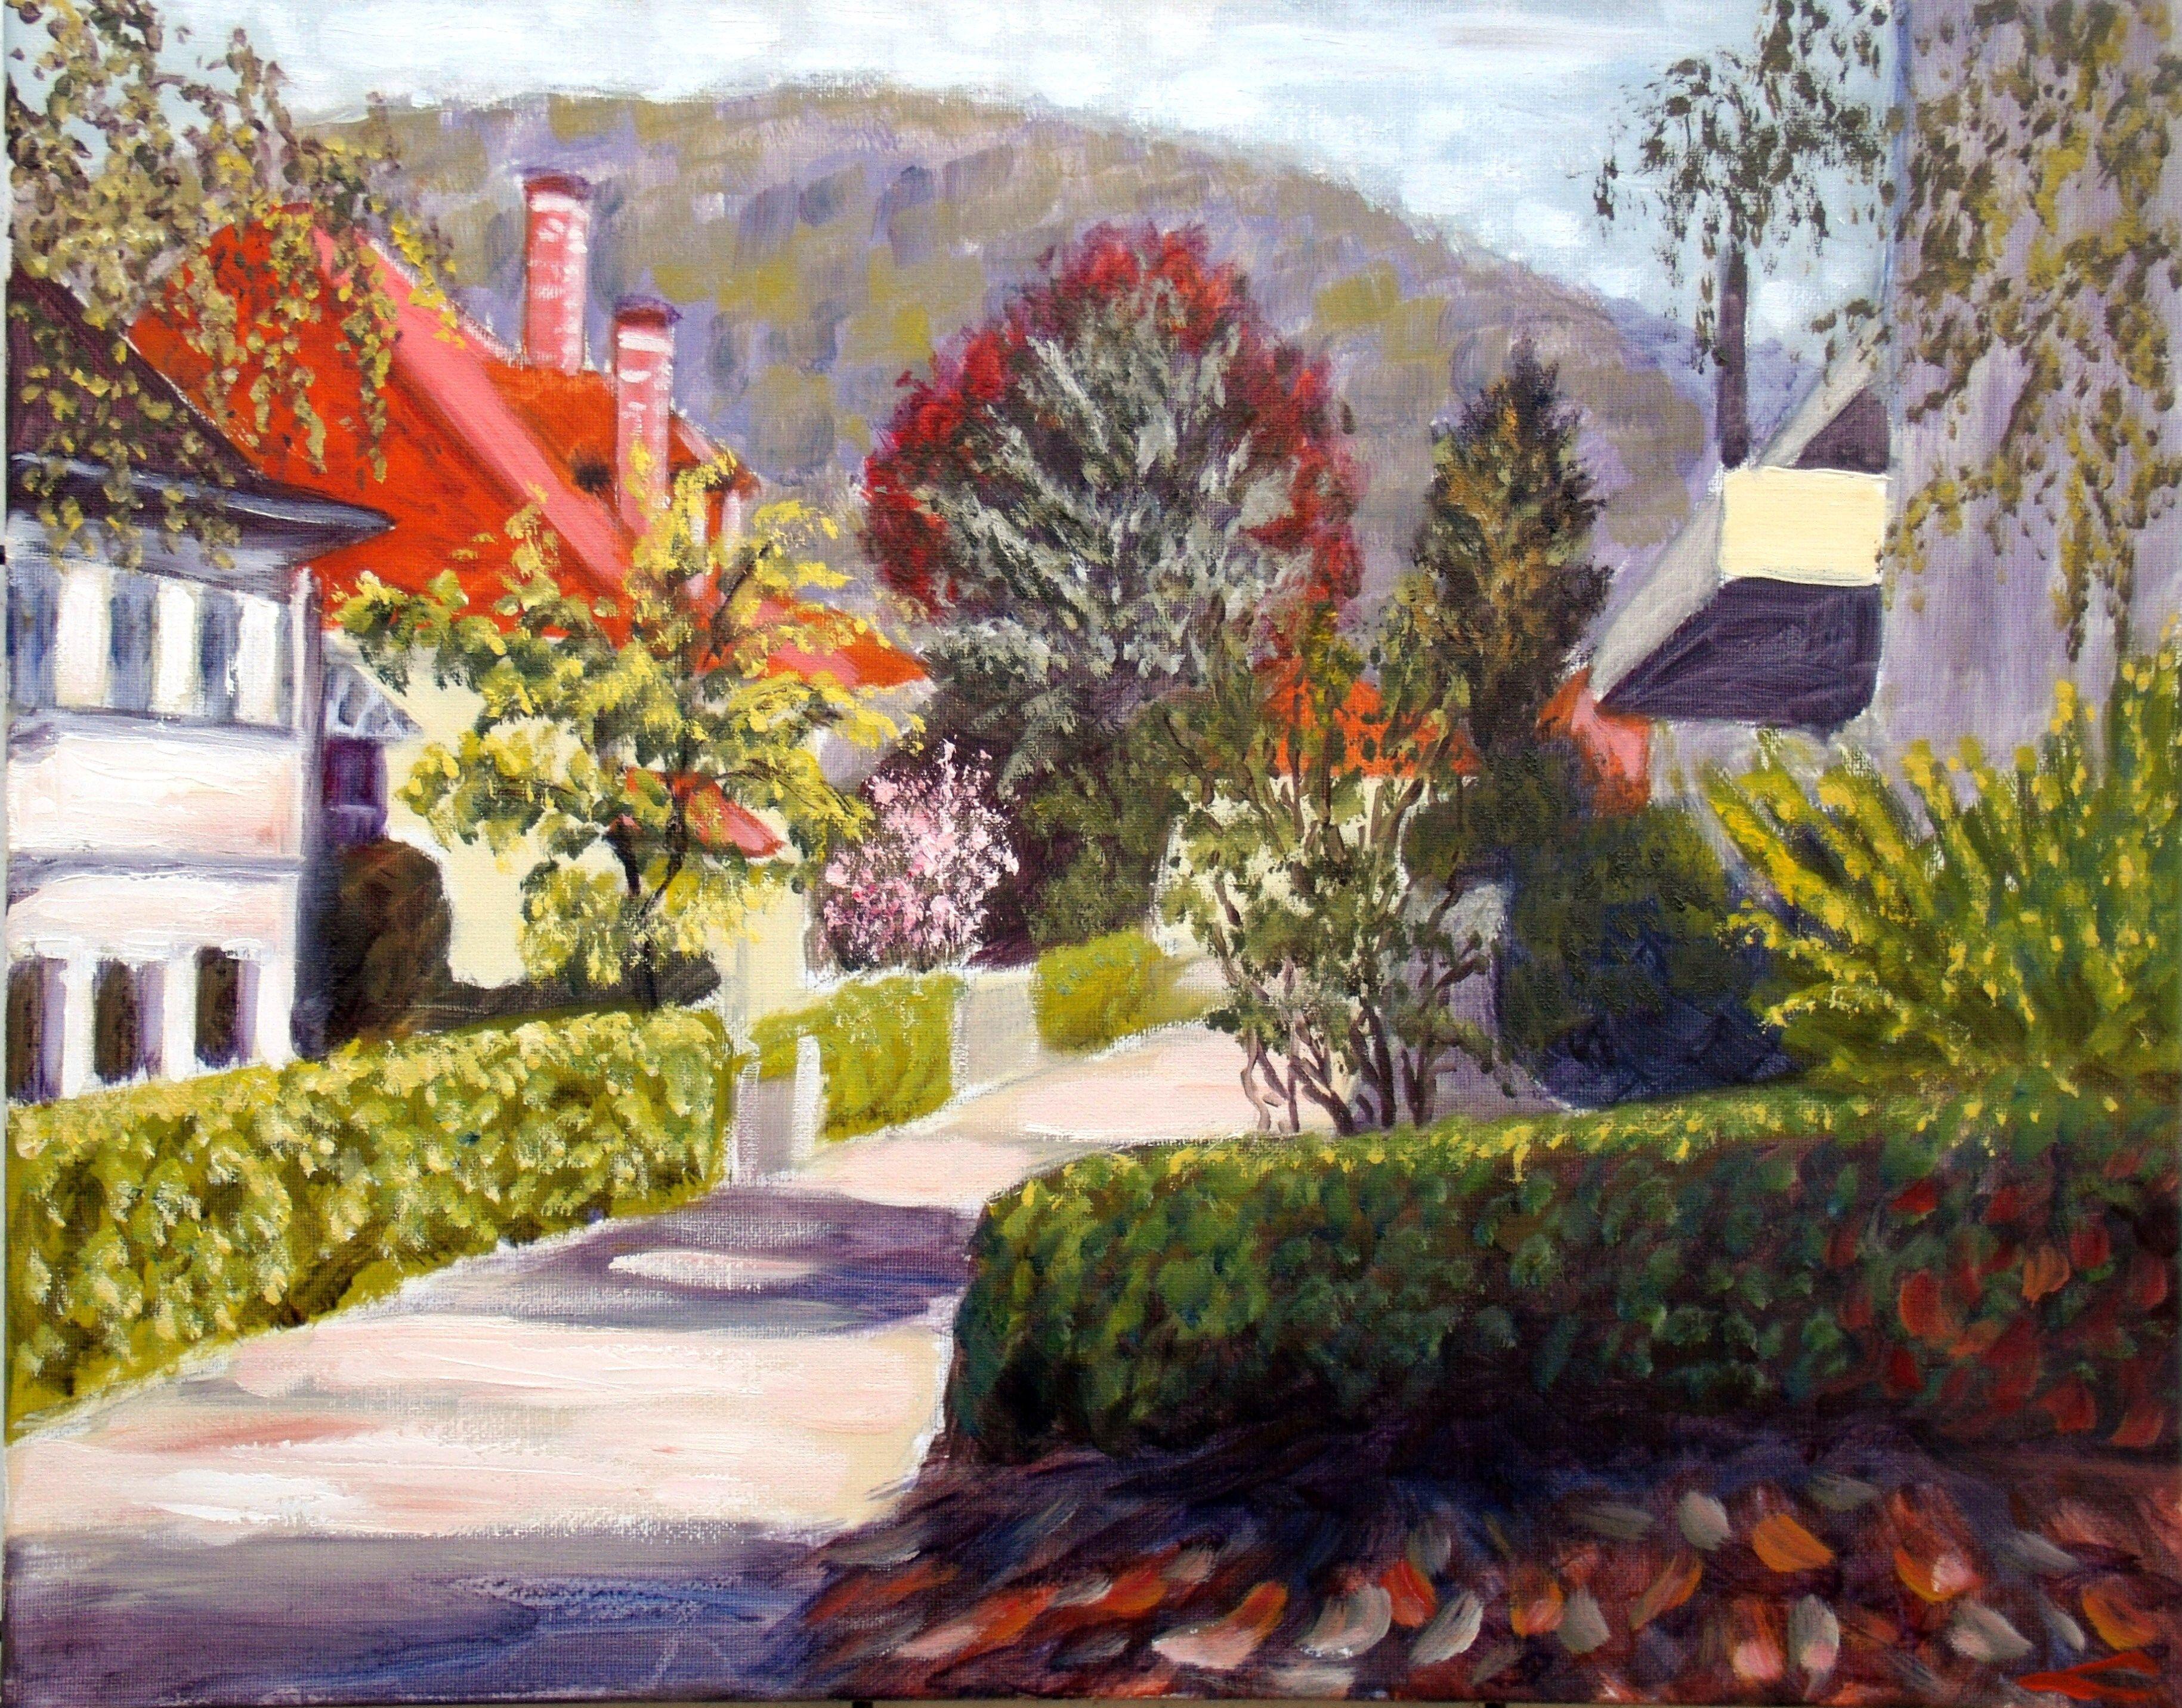 Spring street of Baden - Baden view. Studio painting done after the plain air on the location. :: Painting :: Impressionist :: This piece comes with an official certificate of authenticity signed by the artist :: Ready to Hang: Yes :: Signed: Yes ::